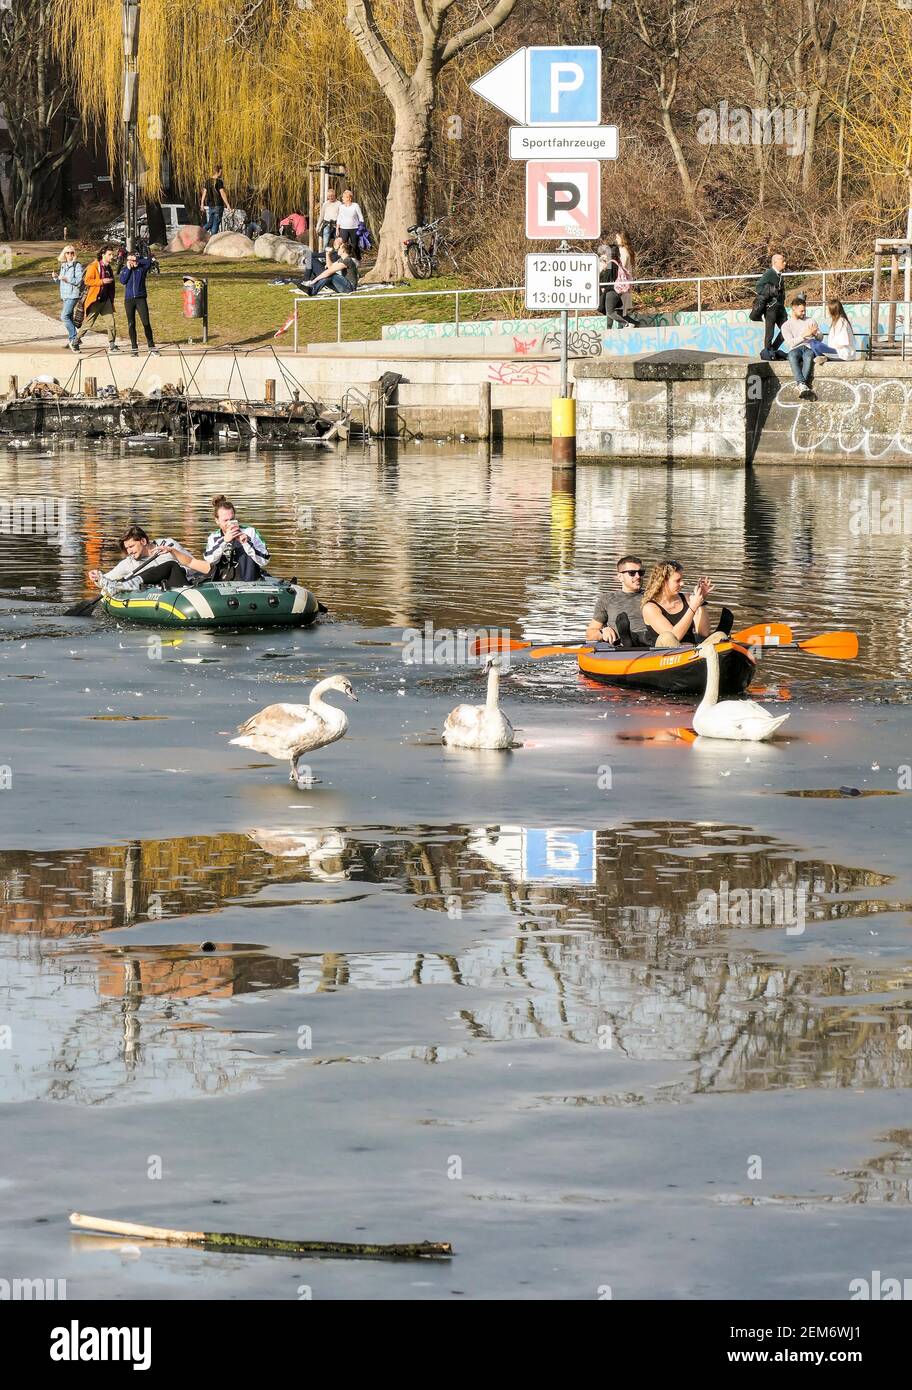 Berlin, Germany. 24th Feb, 2021. People row boats on the Landwehr Canal in  Berlin, capital of Germany, Feb. 24, 2021. More than 2.4 million COVID-19  infections have already been officially registered in